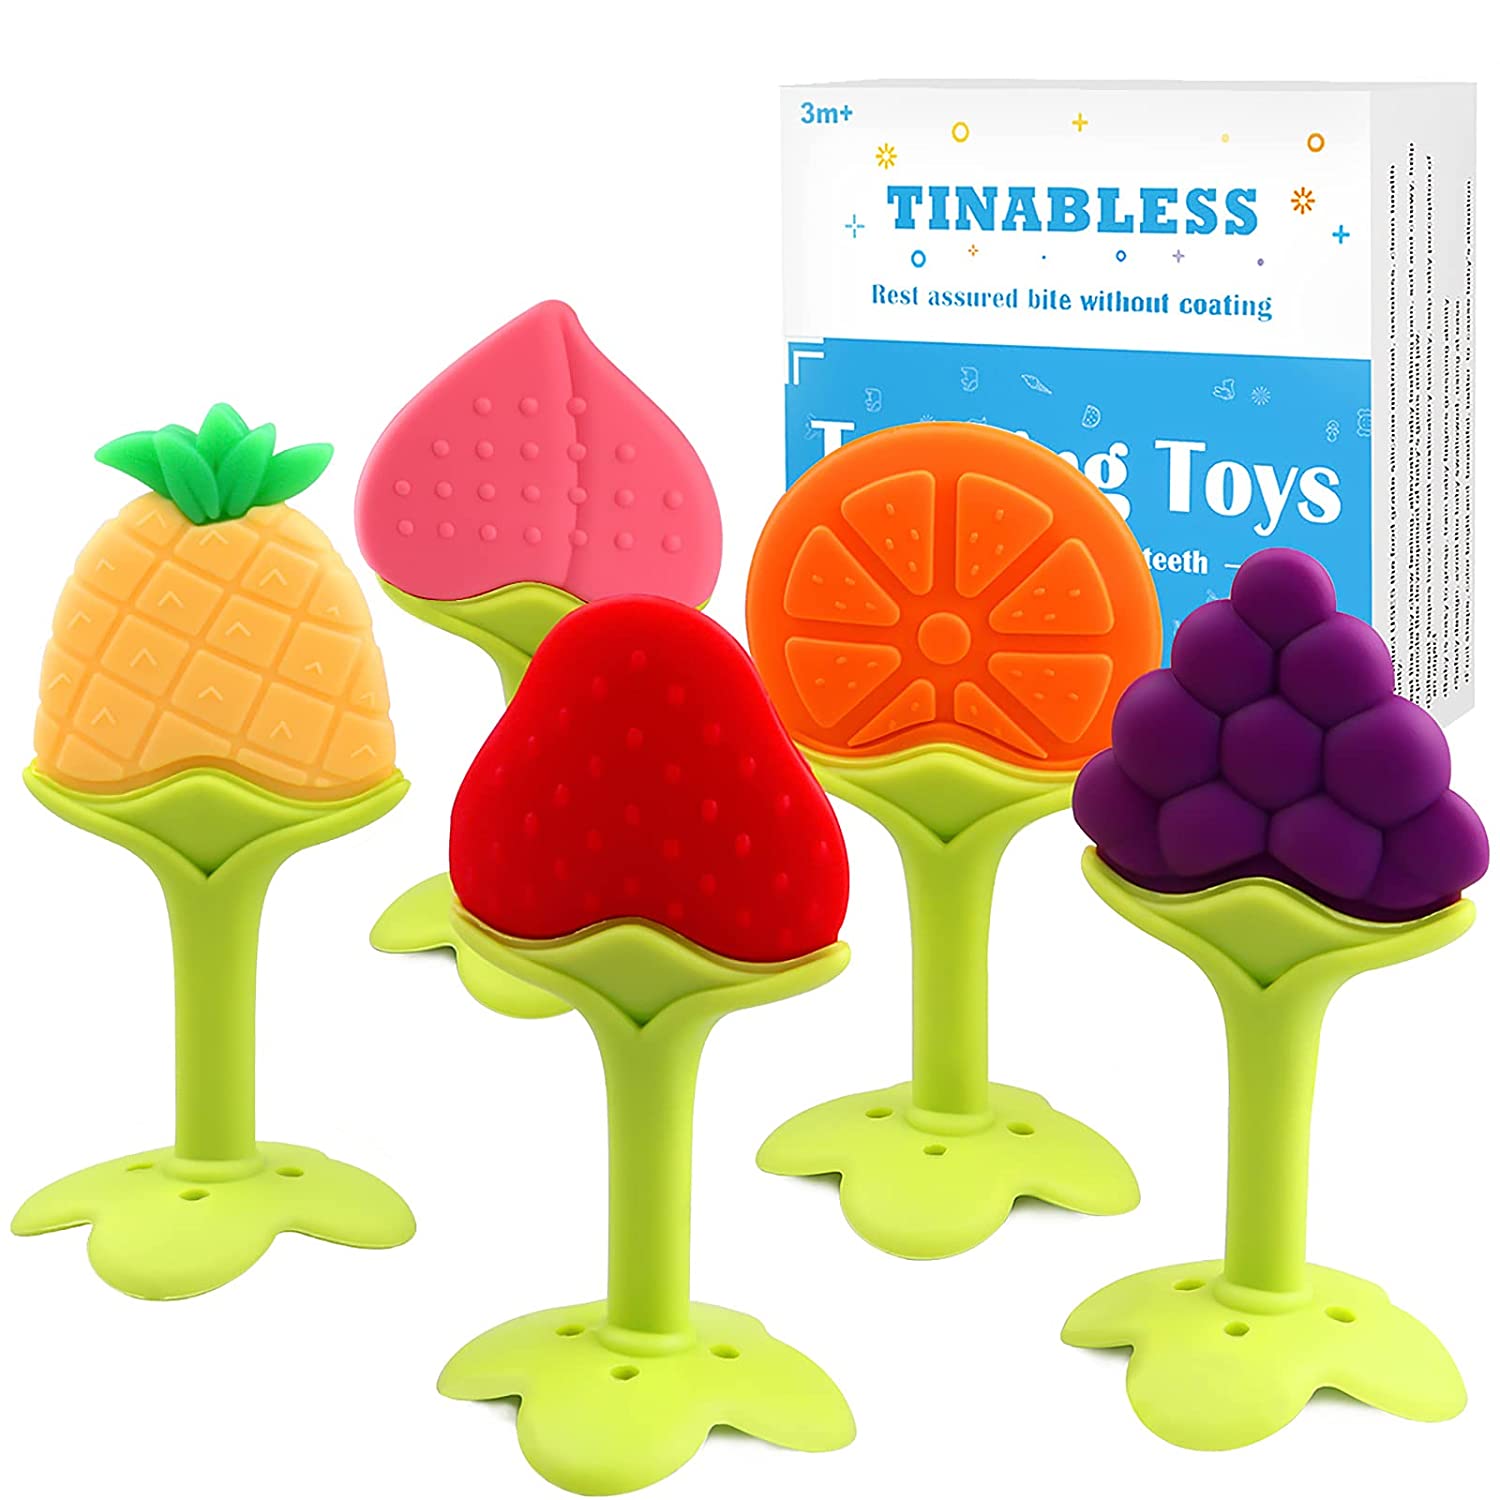 Tinabless Textured Fruit BPA Free Teething Toy, 5-Pack